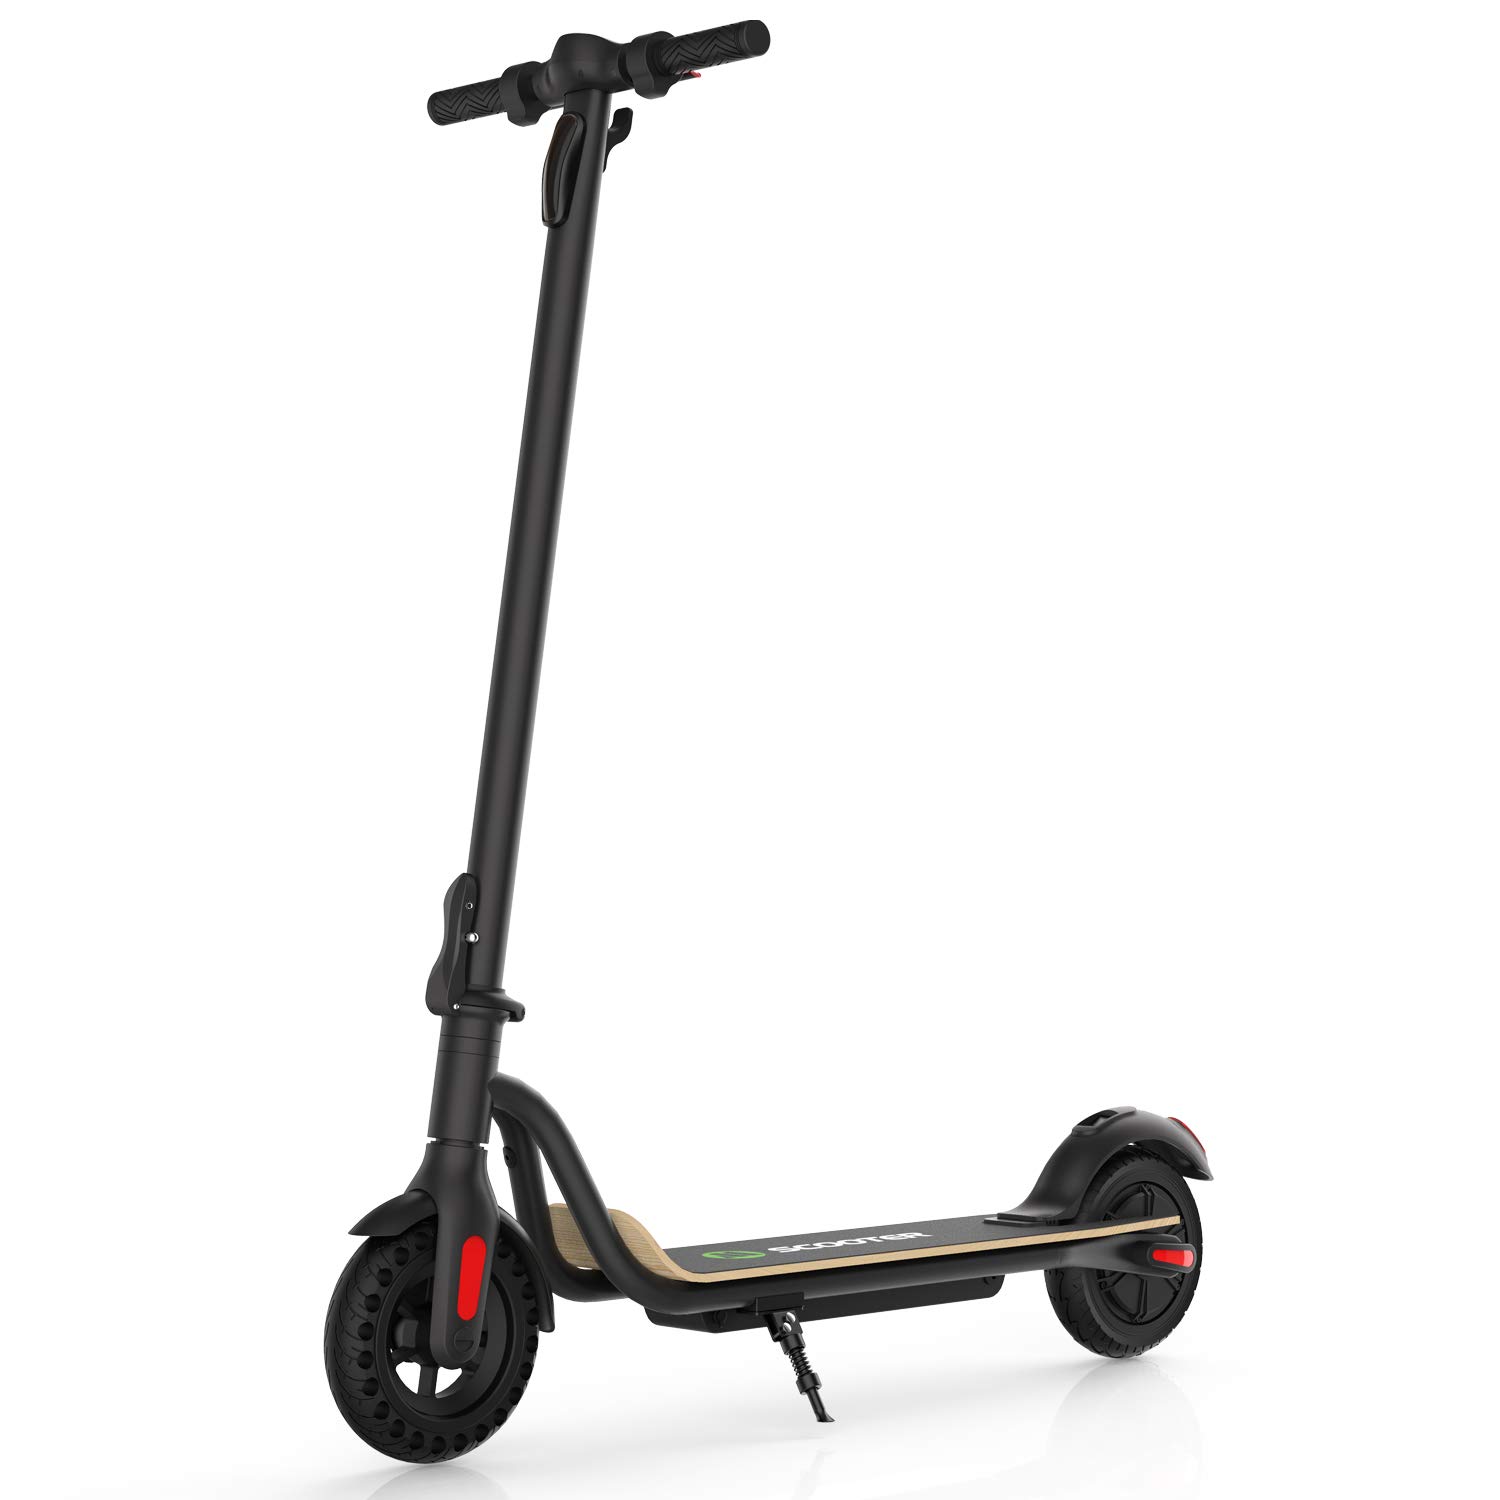 MEGAWHEELS Electric Scooter 3 Gears Max Speed 15.5 MPH Up to 17 Miles Rang 7.5 Ah Powerful Battery with 8 Tires Foldable